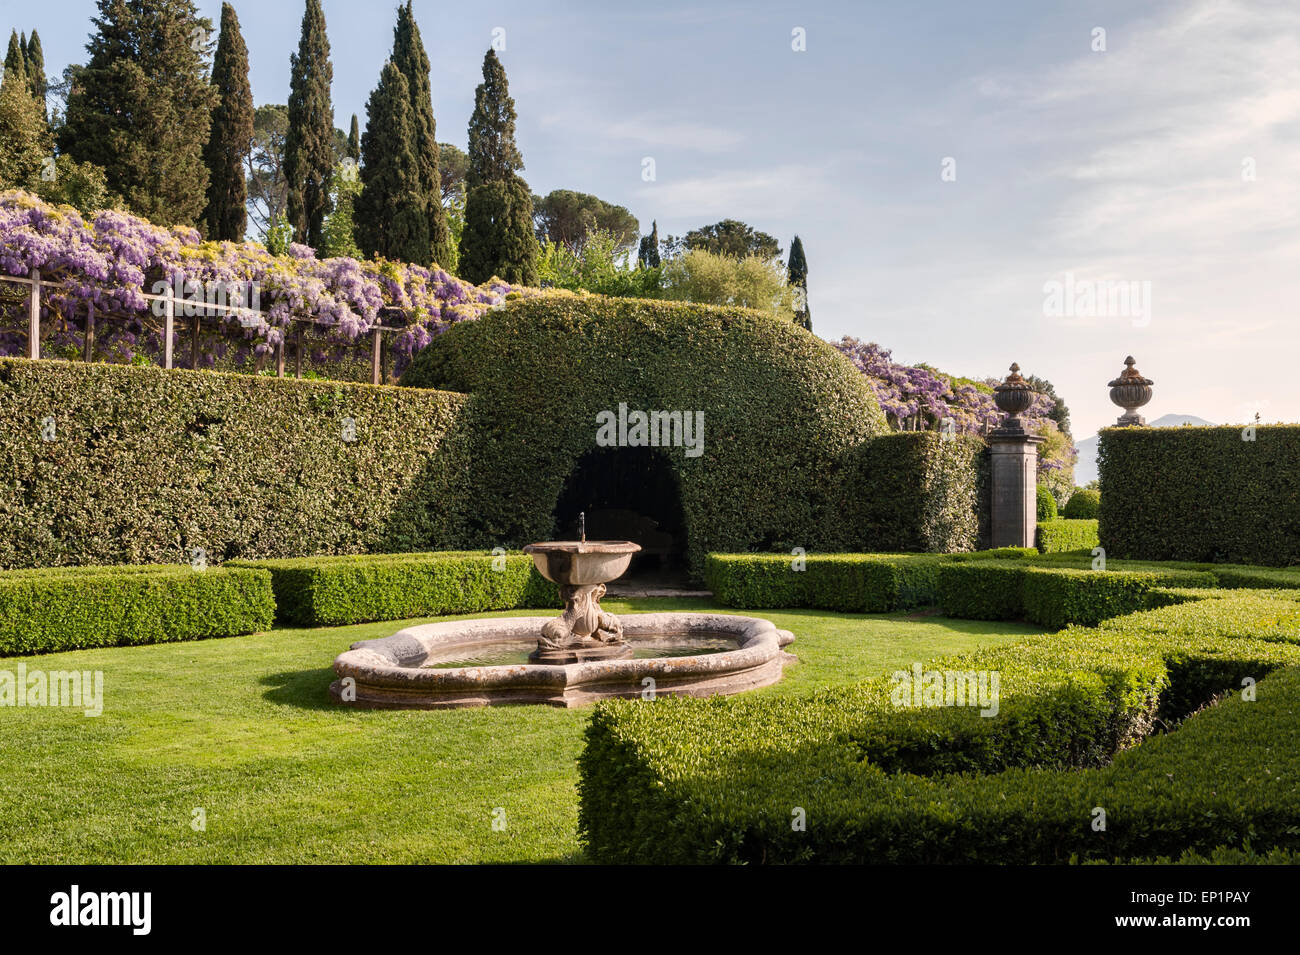 La Foce, Chianciano Terme, Tuscany, Italy. Garden designed in the 1930's by Cecil Pinsent for Iris Origo and her family. Stock Photo